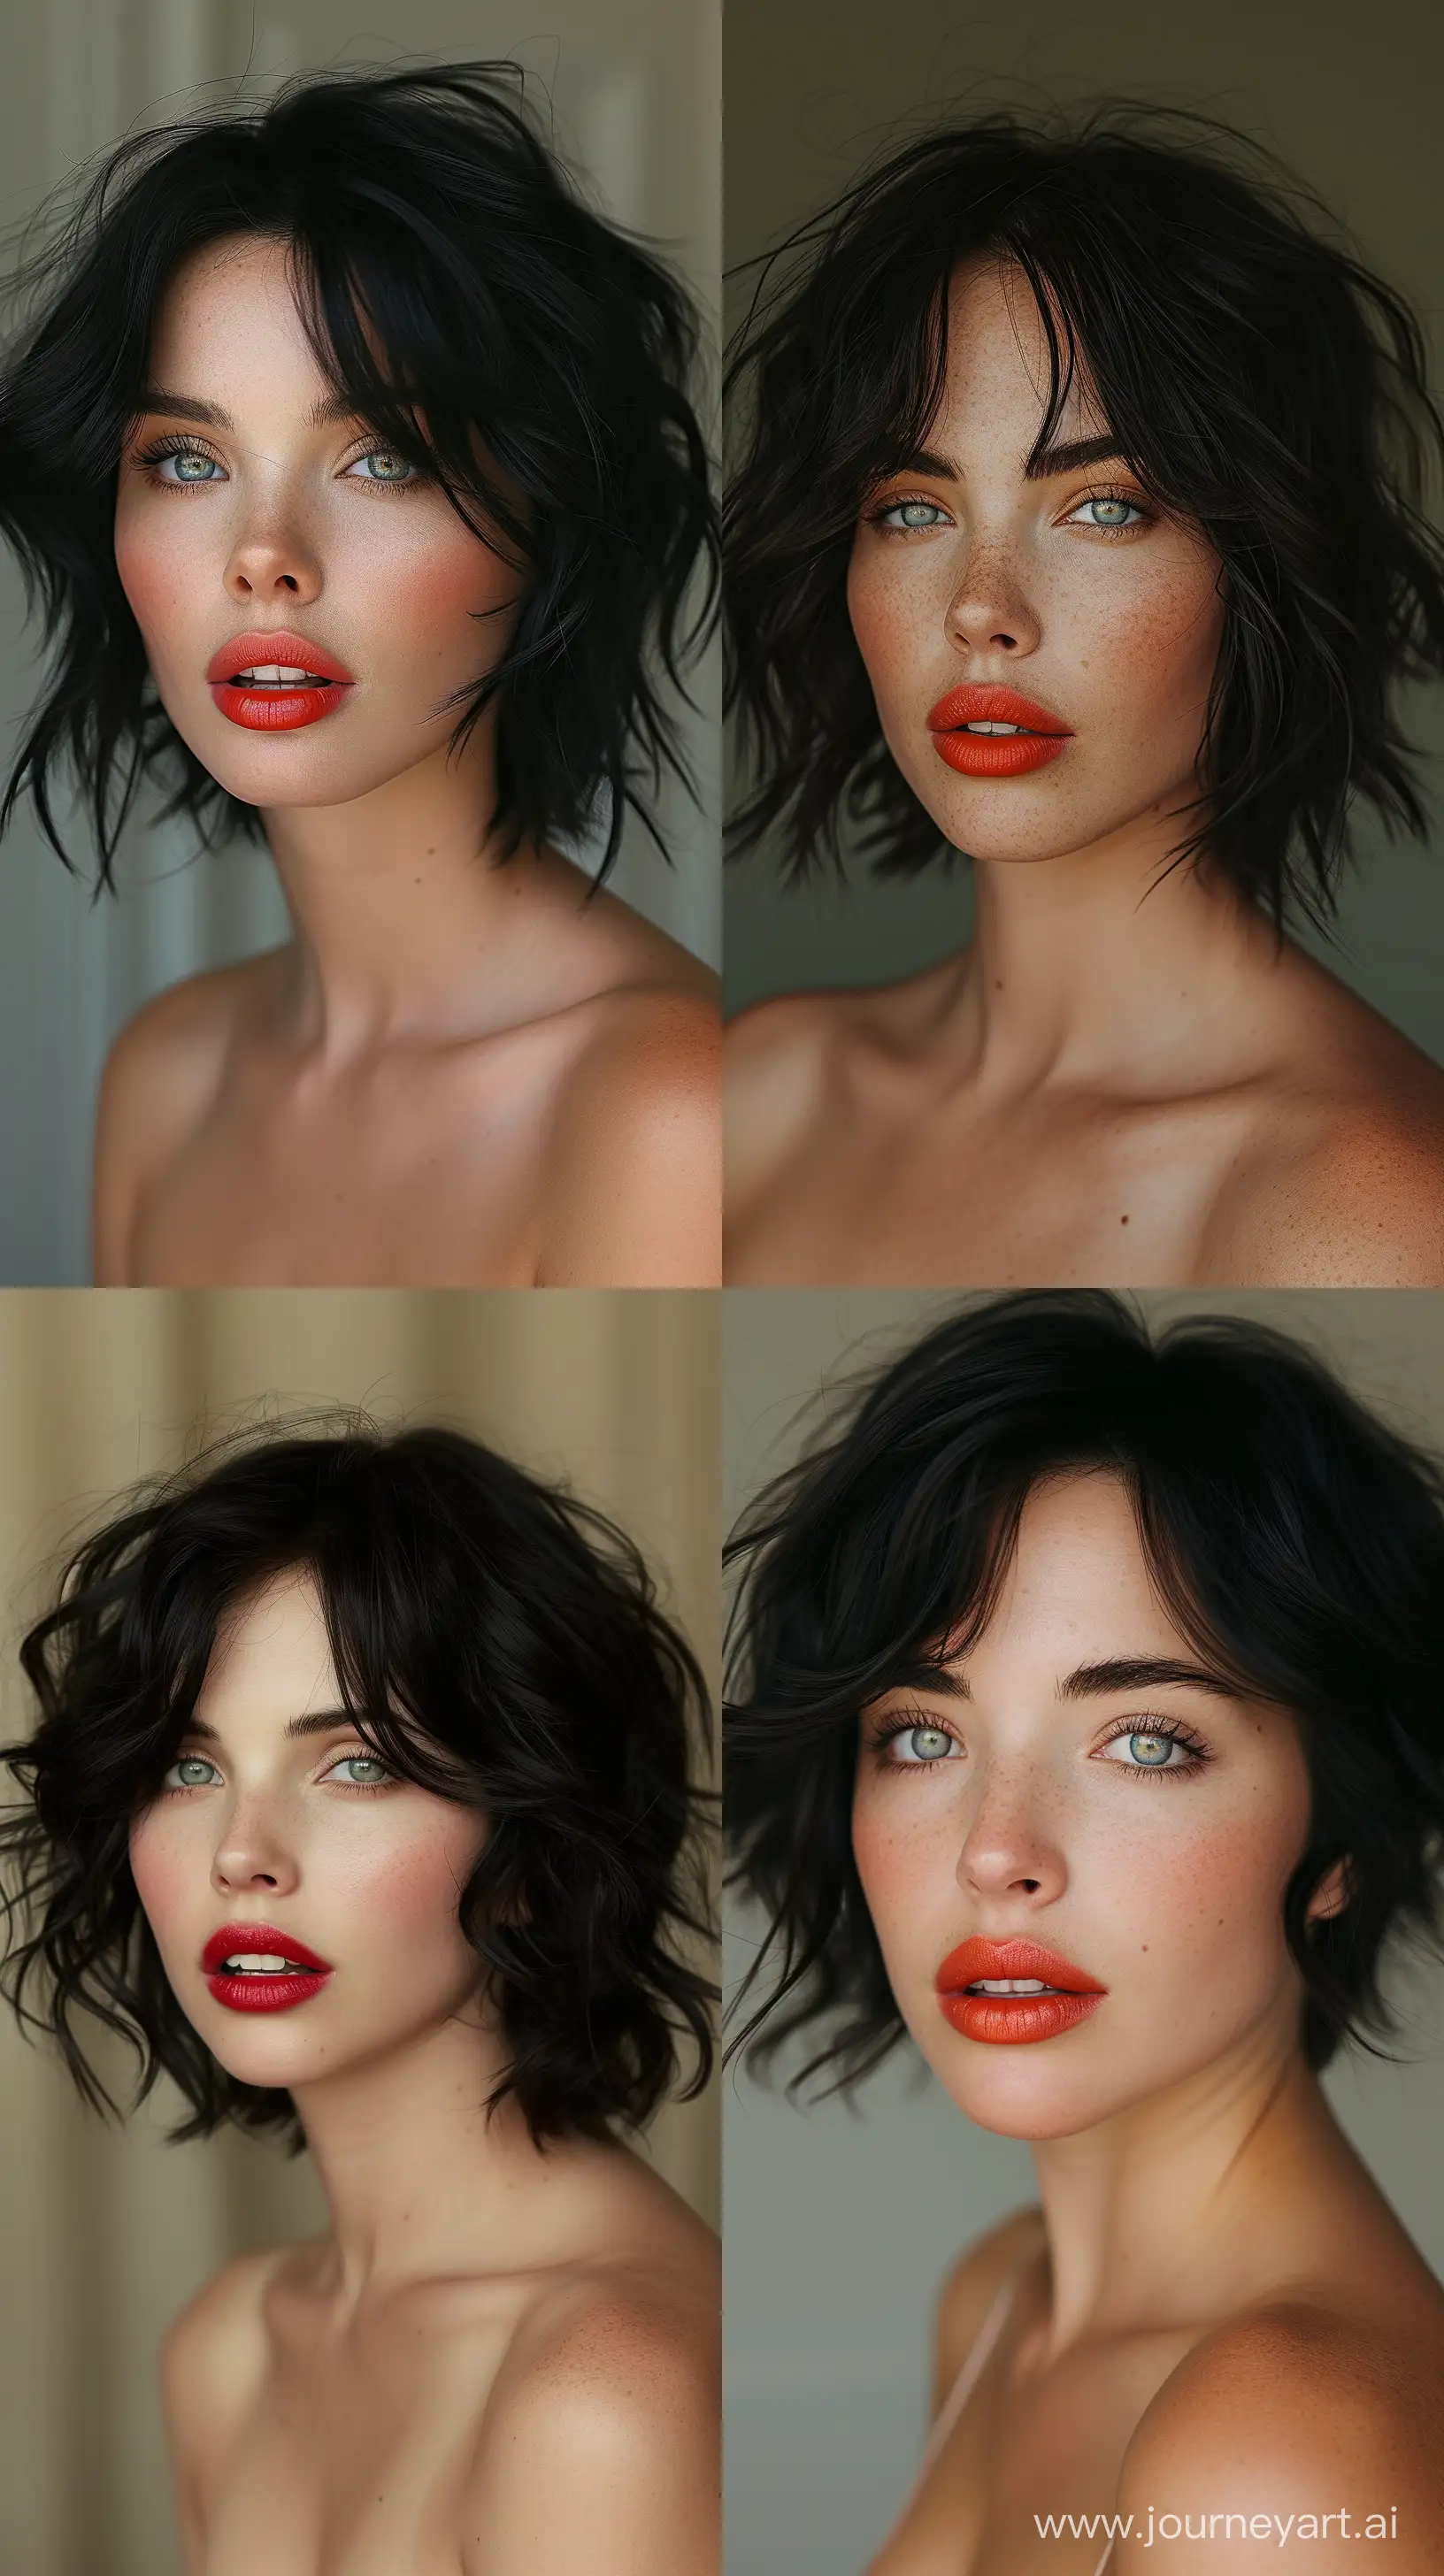 Innocent-Beauty-Captivating-35YearOld-Woman-with-Short-Wavy-Black-Hair-and-Red-Lipstick